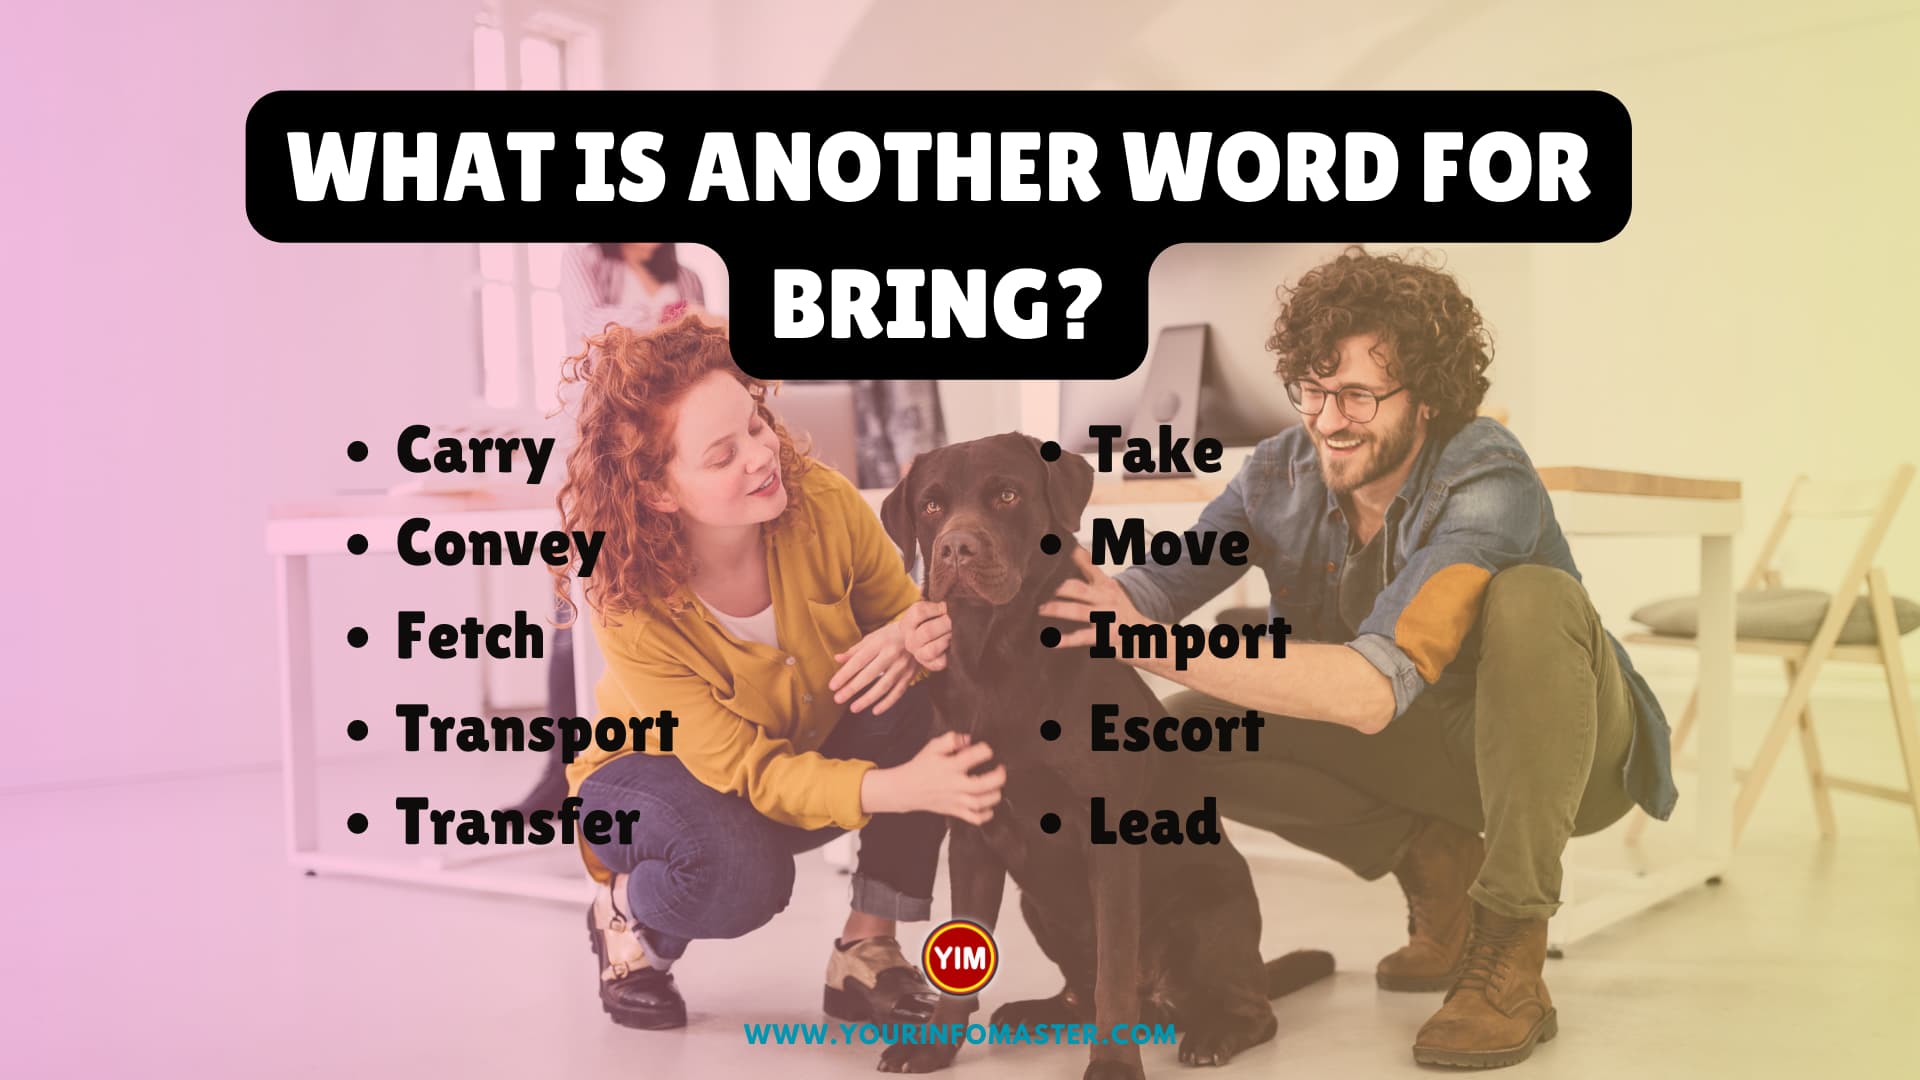 What is another word for Bring